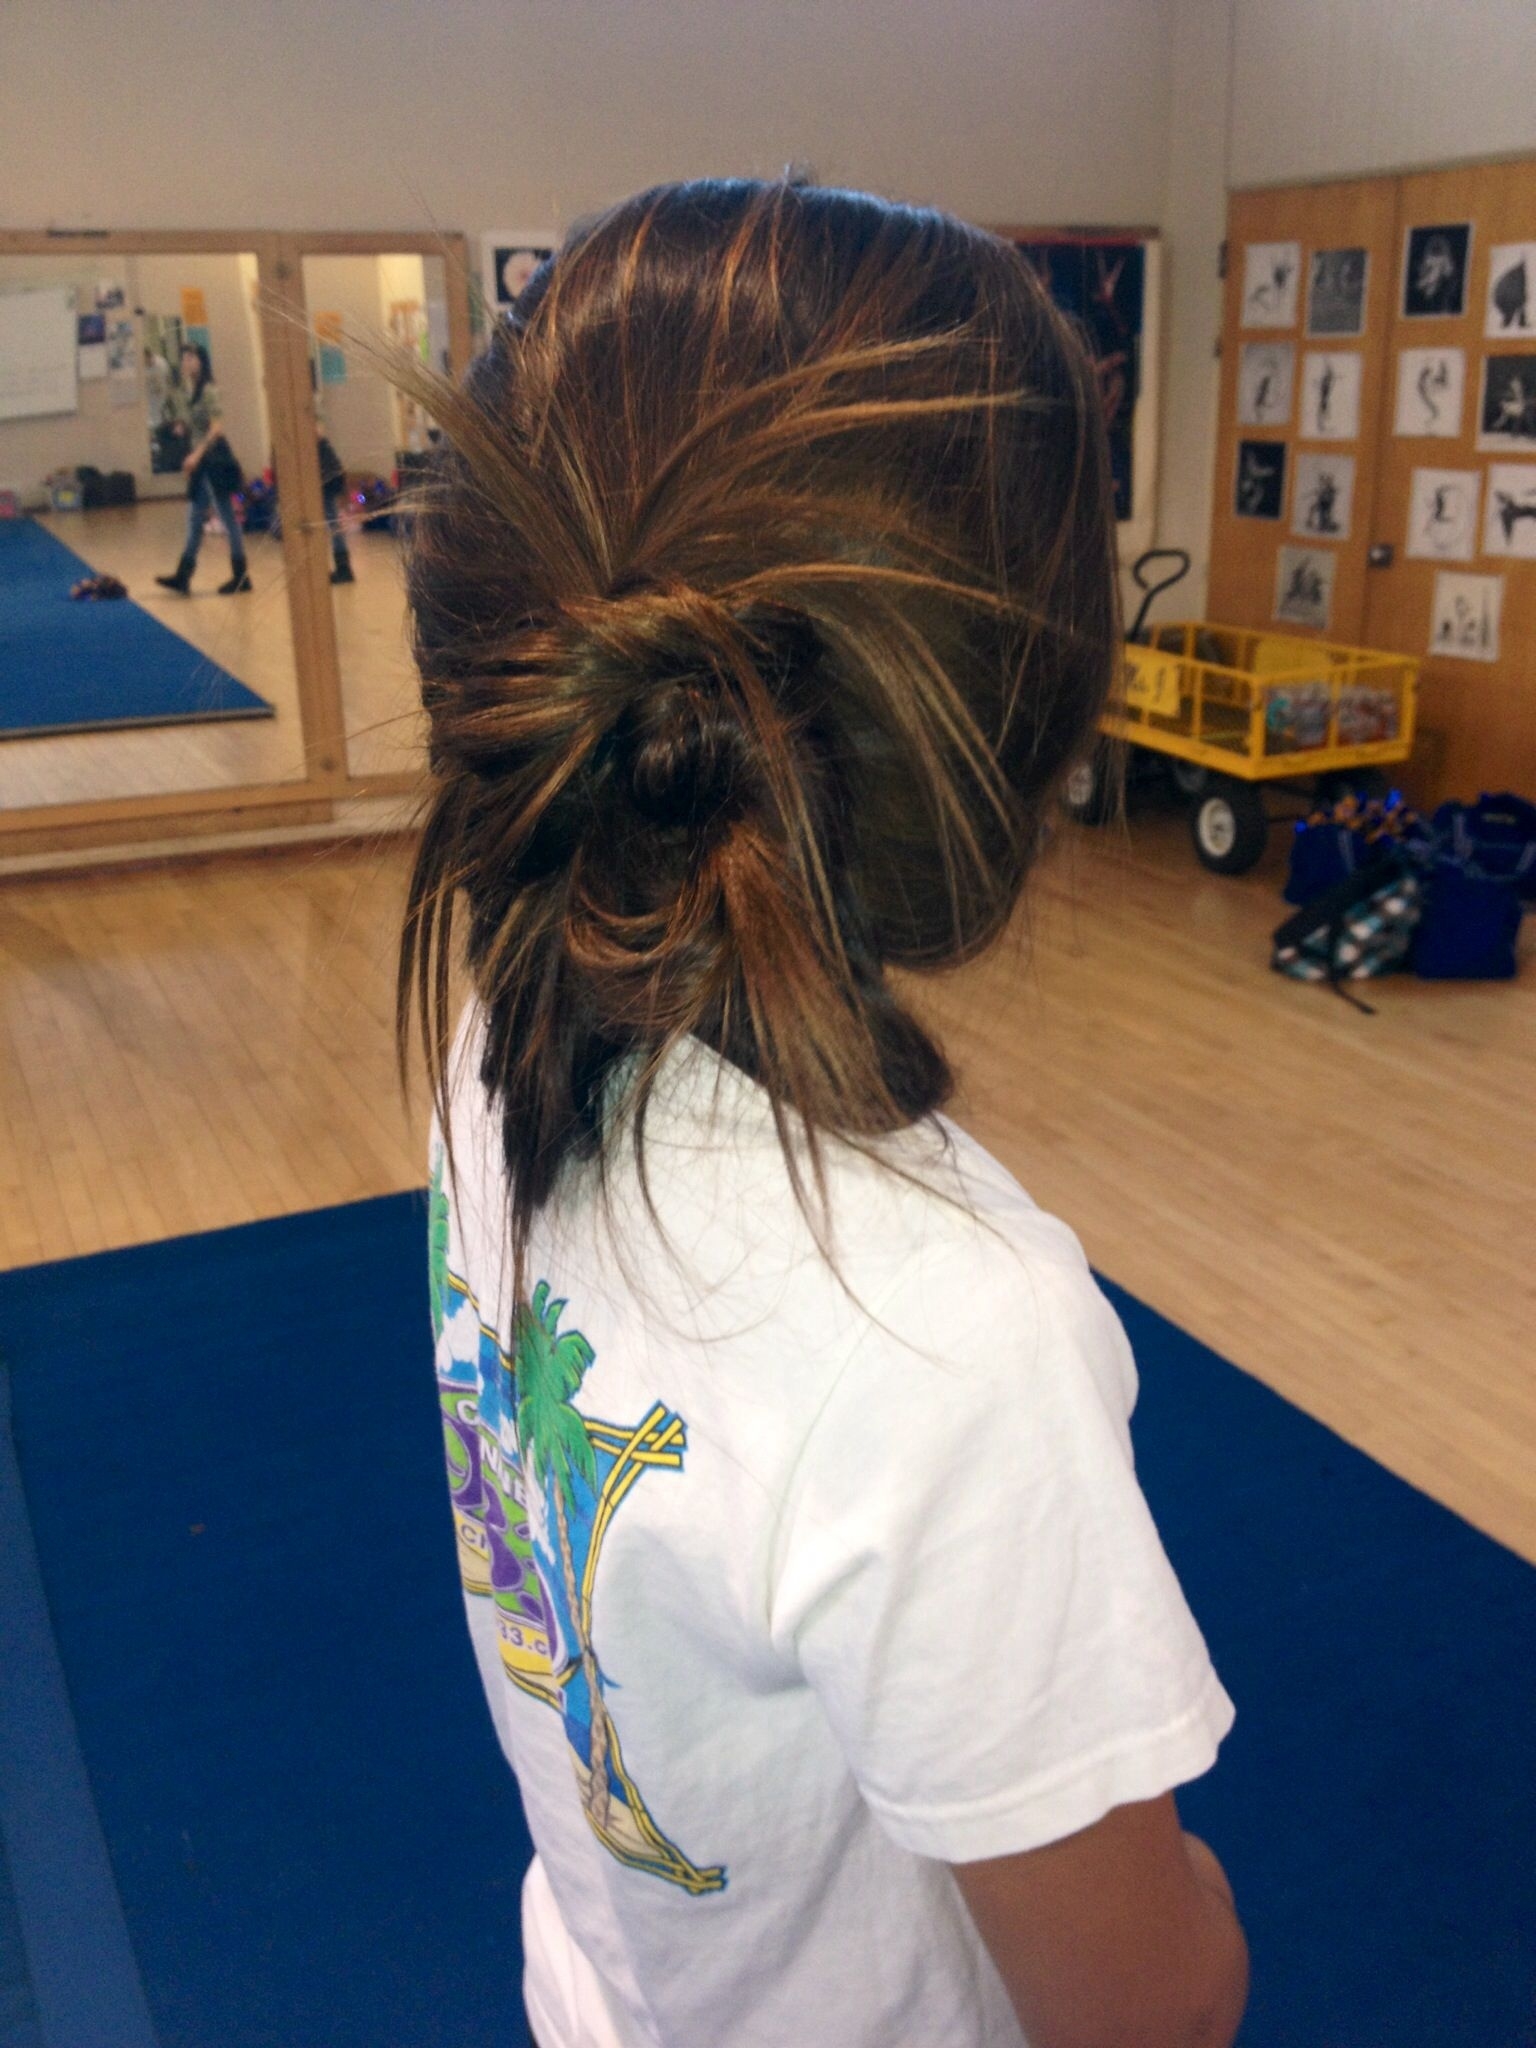 Perfect Hair For Cheer Practice | Hair | Cheer Hair, Hair inside Cheer Hairstyles For Practice